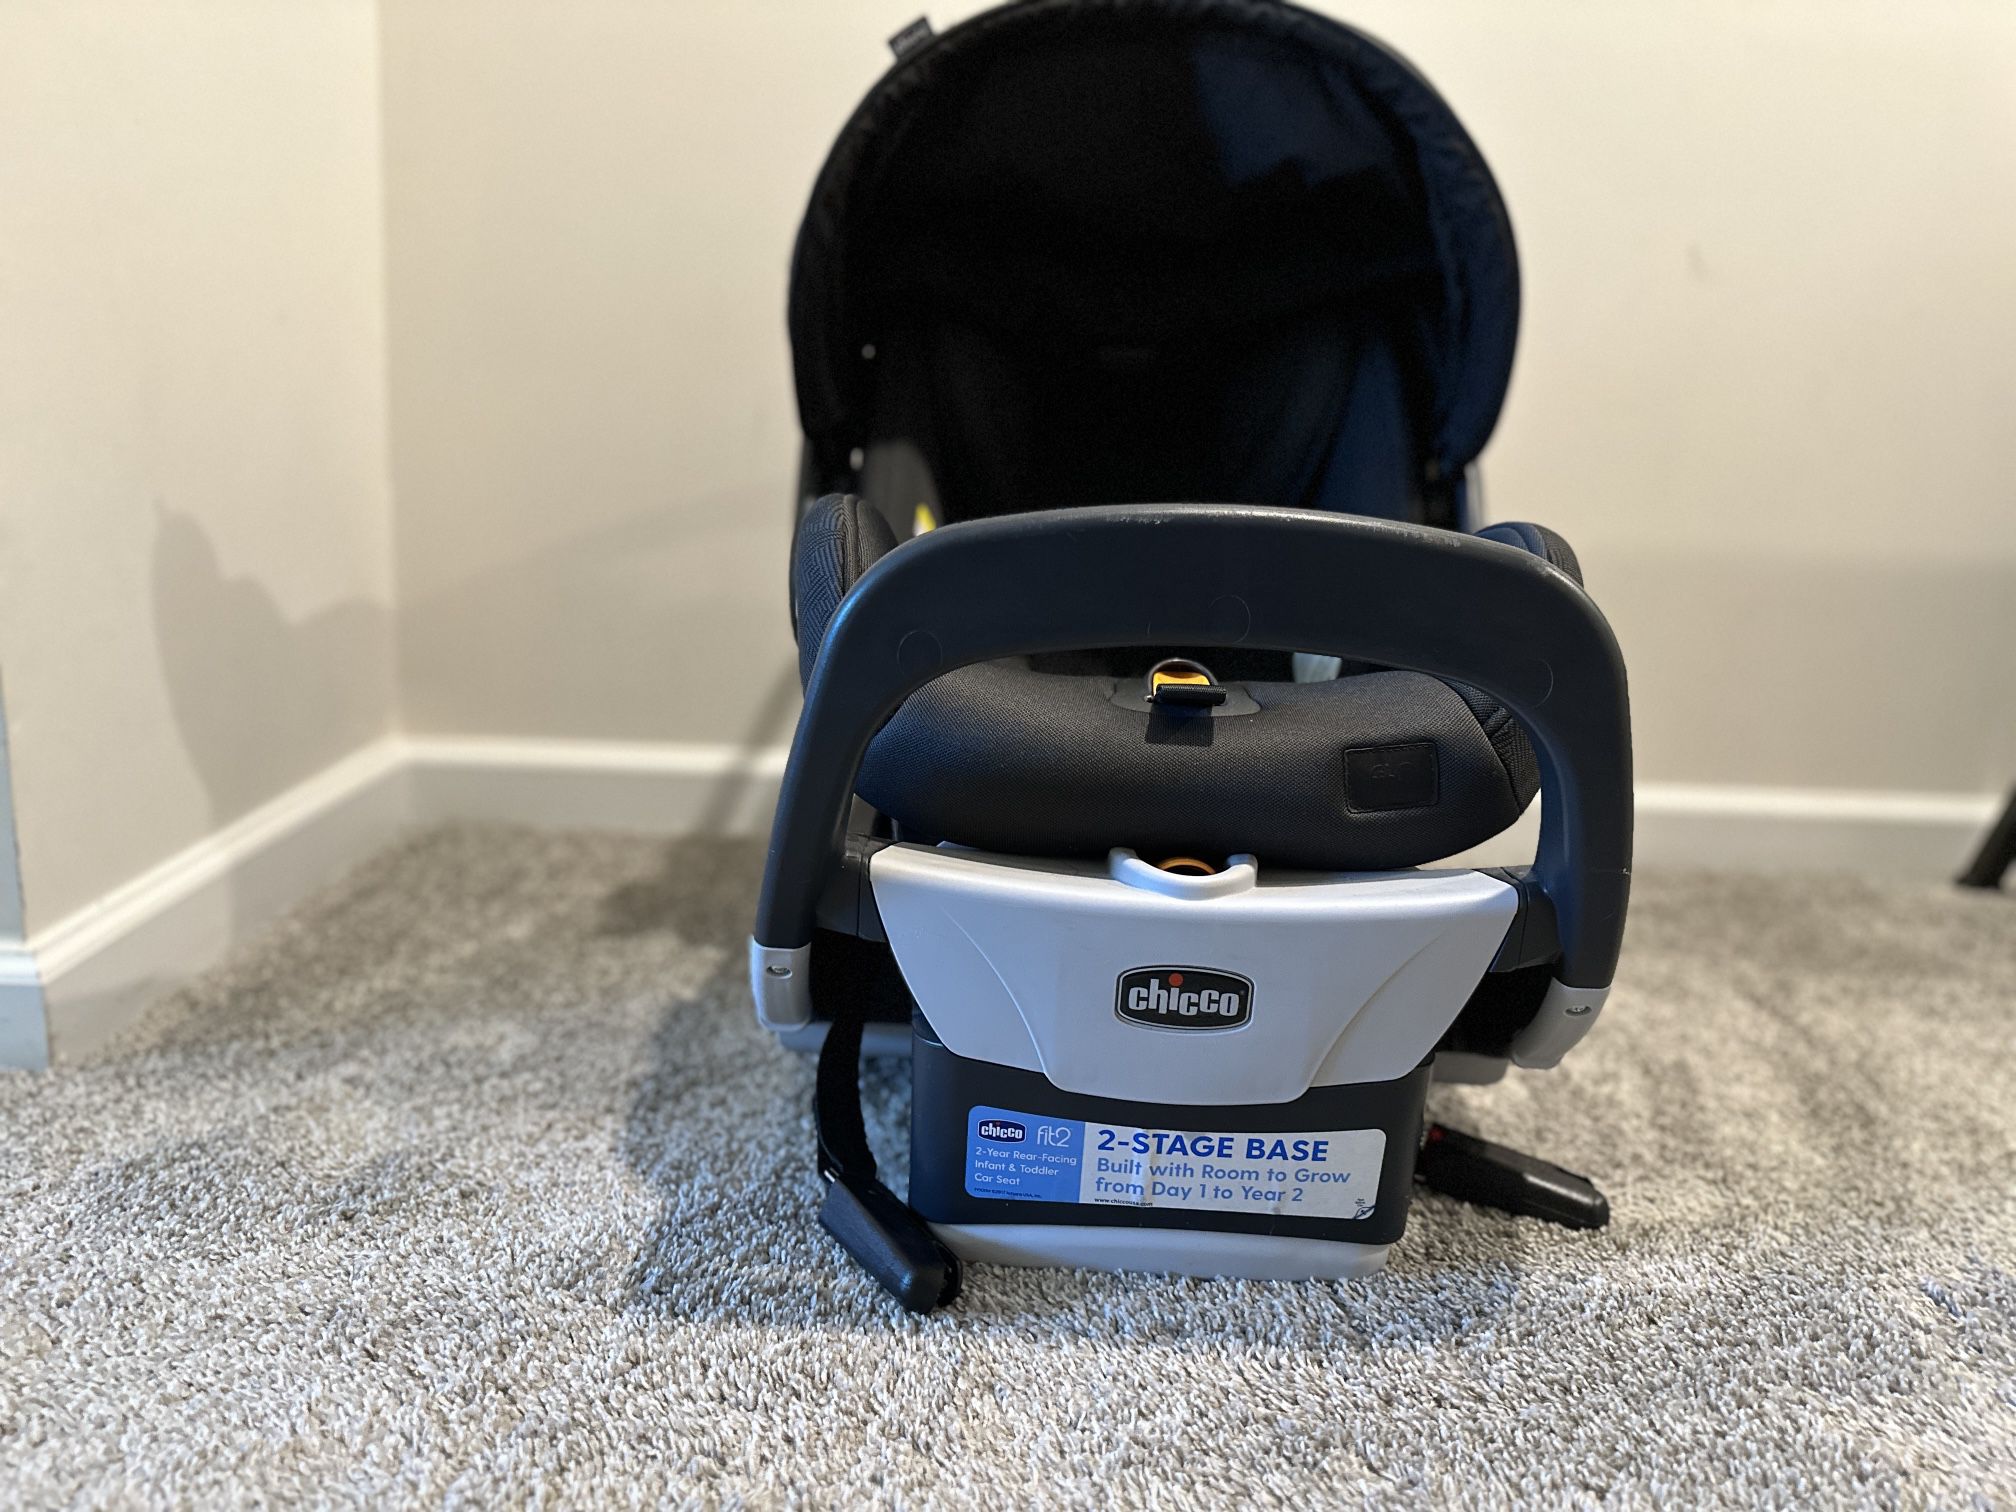 Chico Fit 2 2-year Rear-Facing Infant & Toddler Car Seat